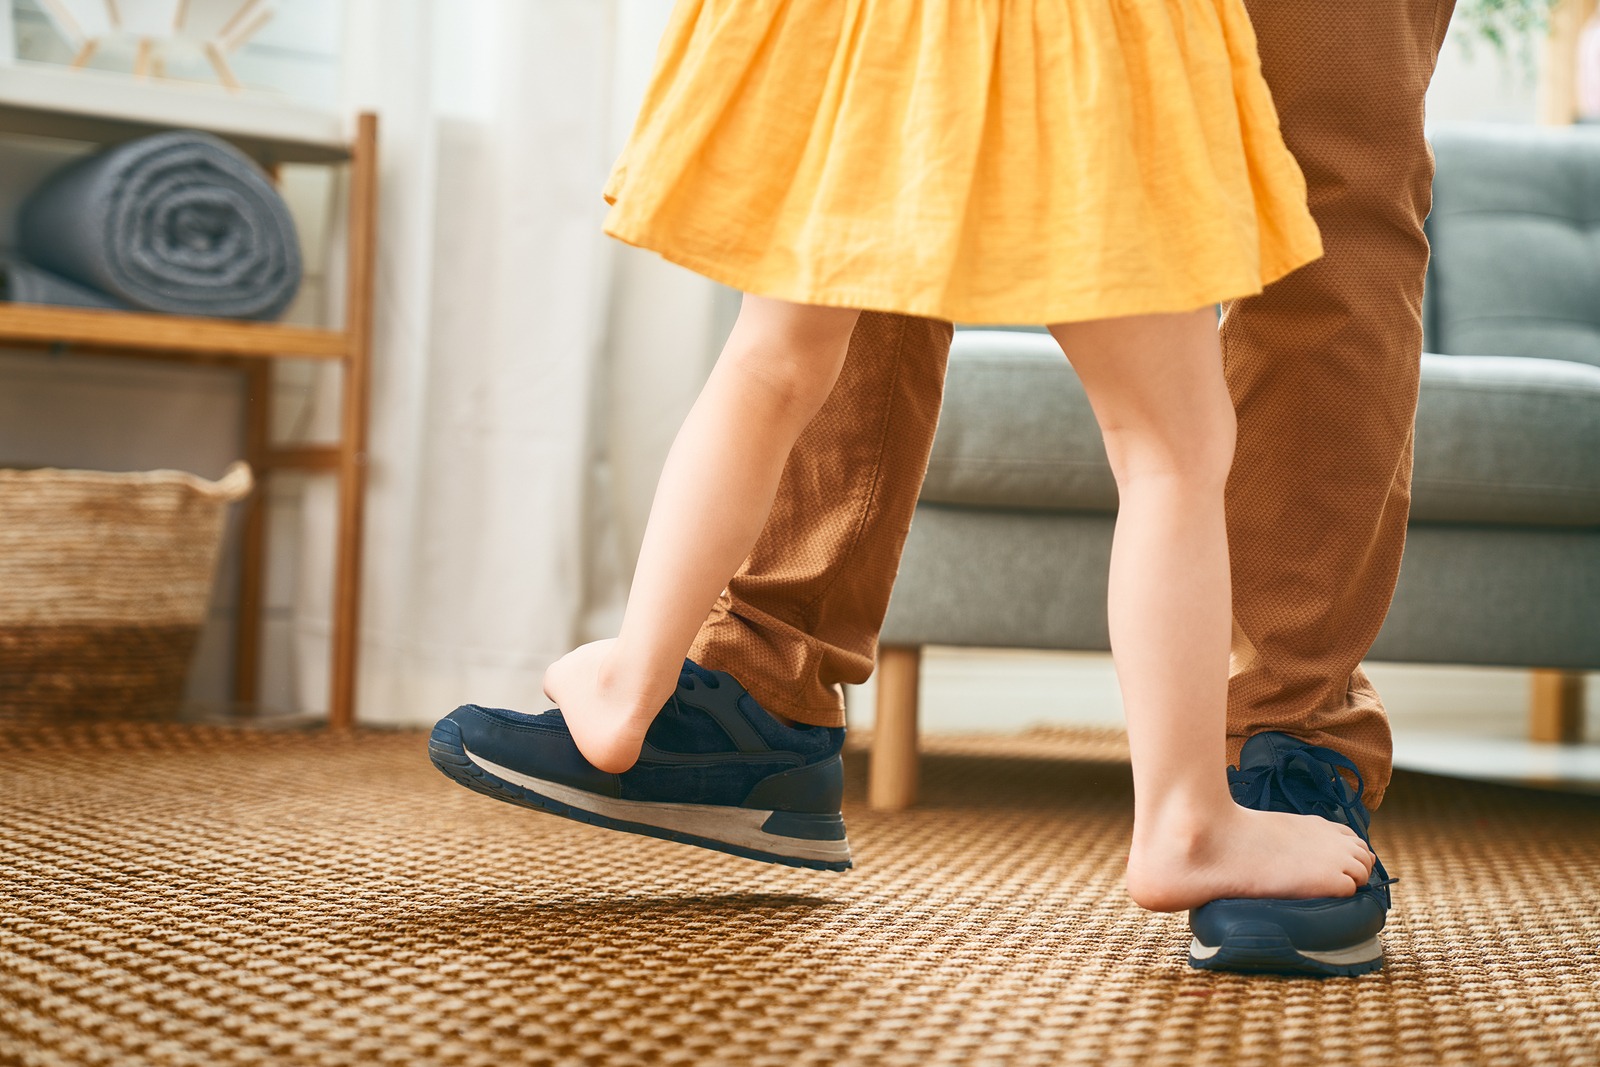 stepchildren need to be provided for explicitly in estate planning documents, little girl standing on her daddy's feet while they dance